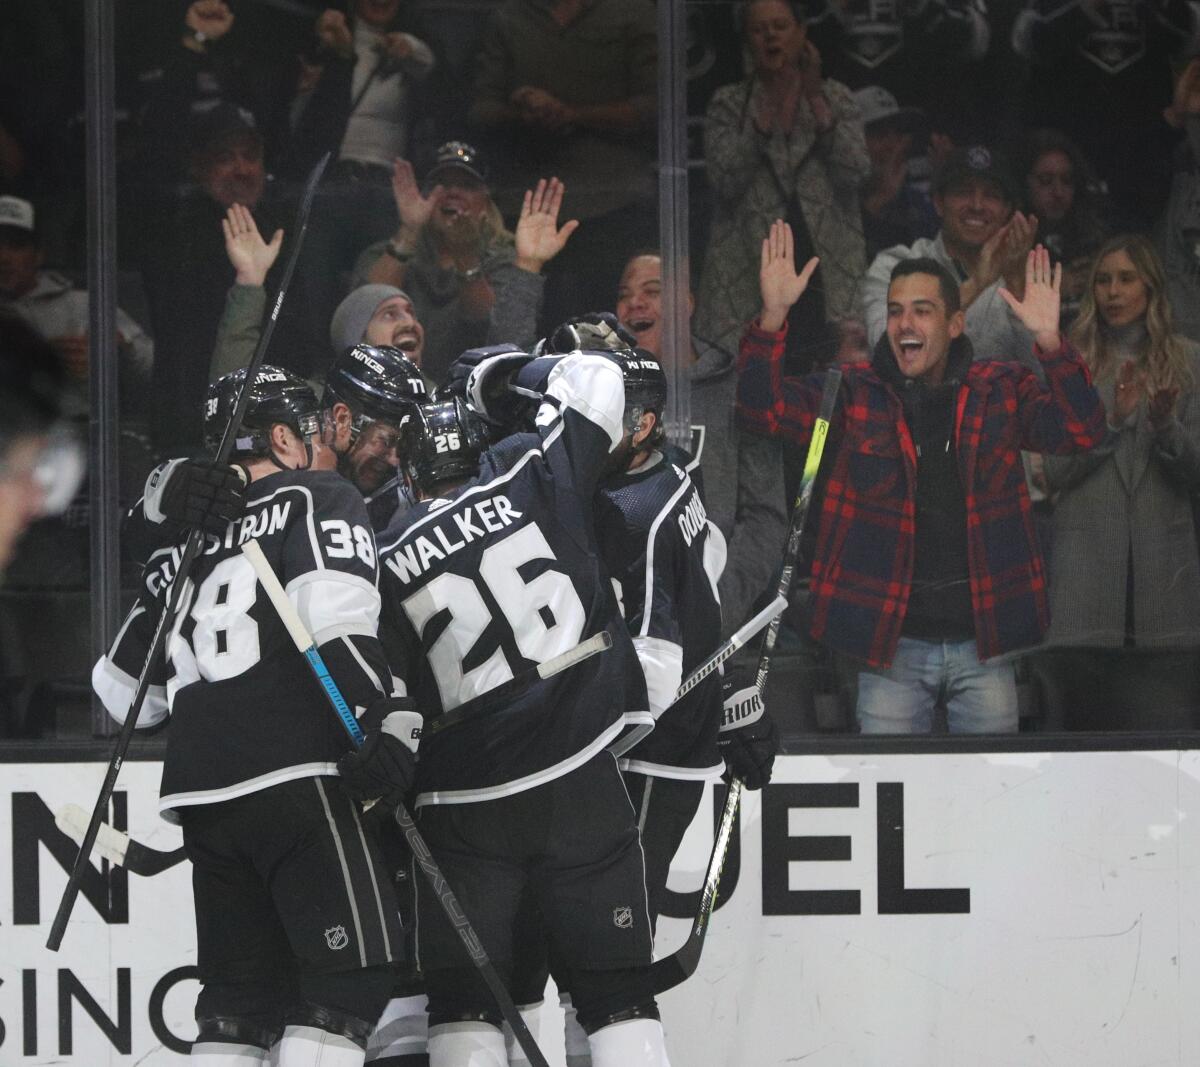 Kings center Tyler Toffoli (73) is surrounded by his teammates after scoring a goal against the Oilers during the first period of a game Nov. 21 at Staples Center.